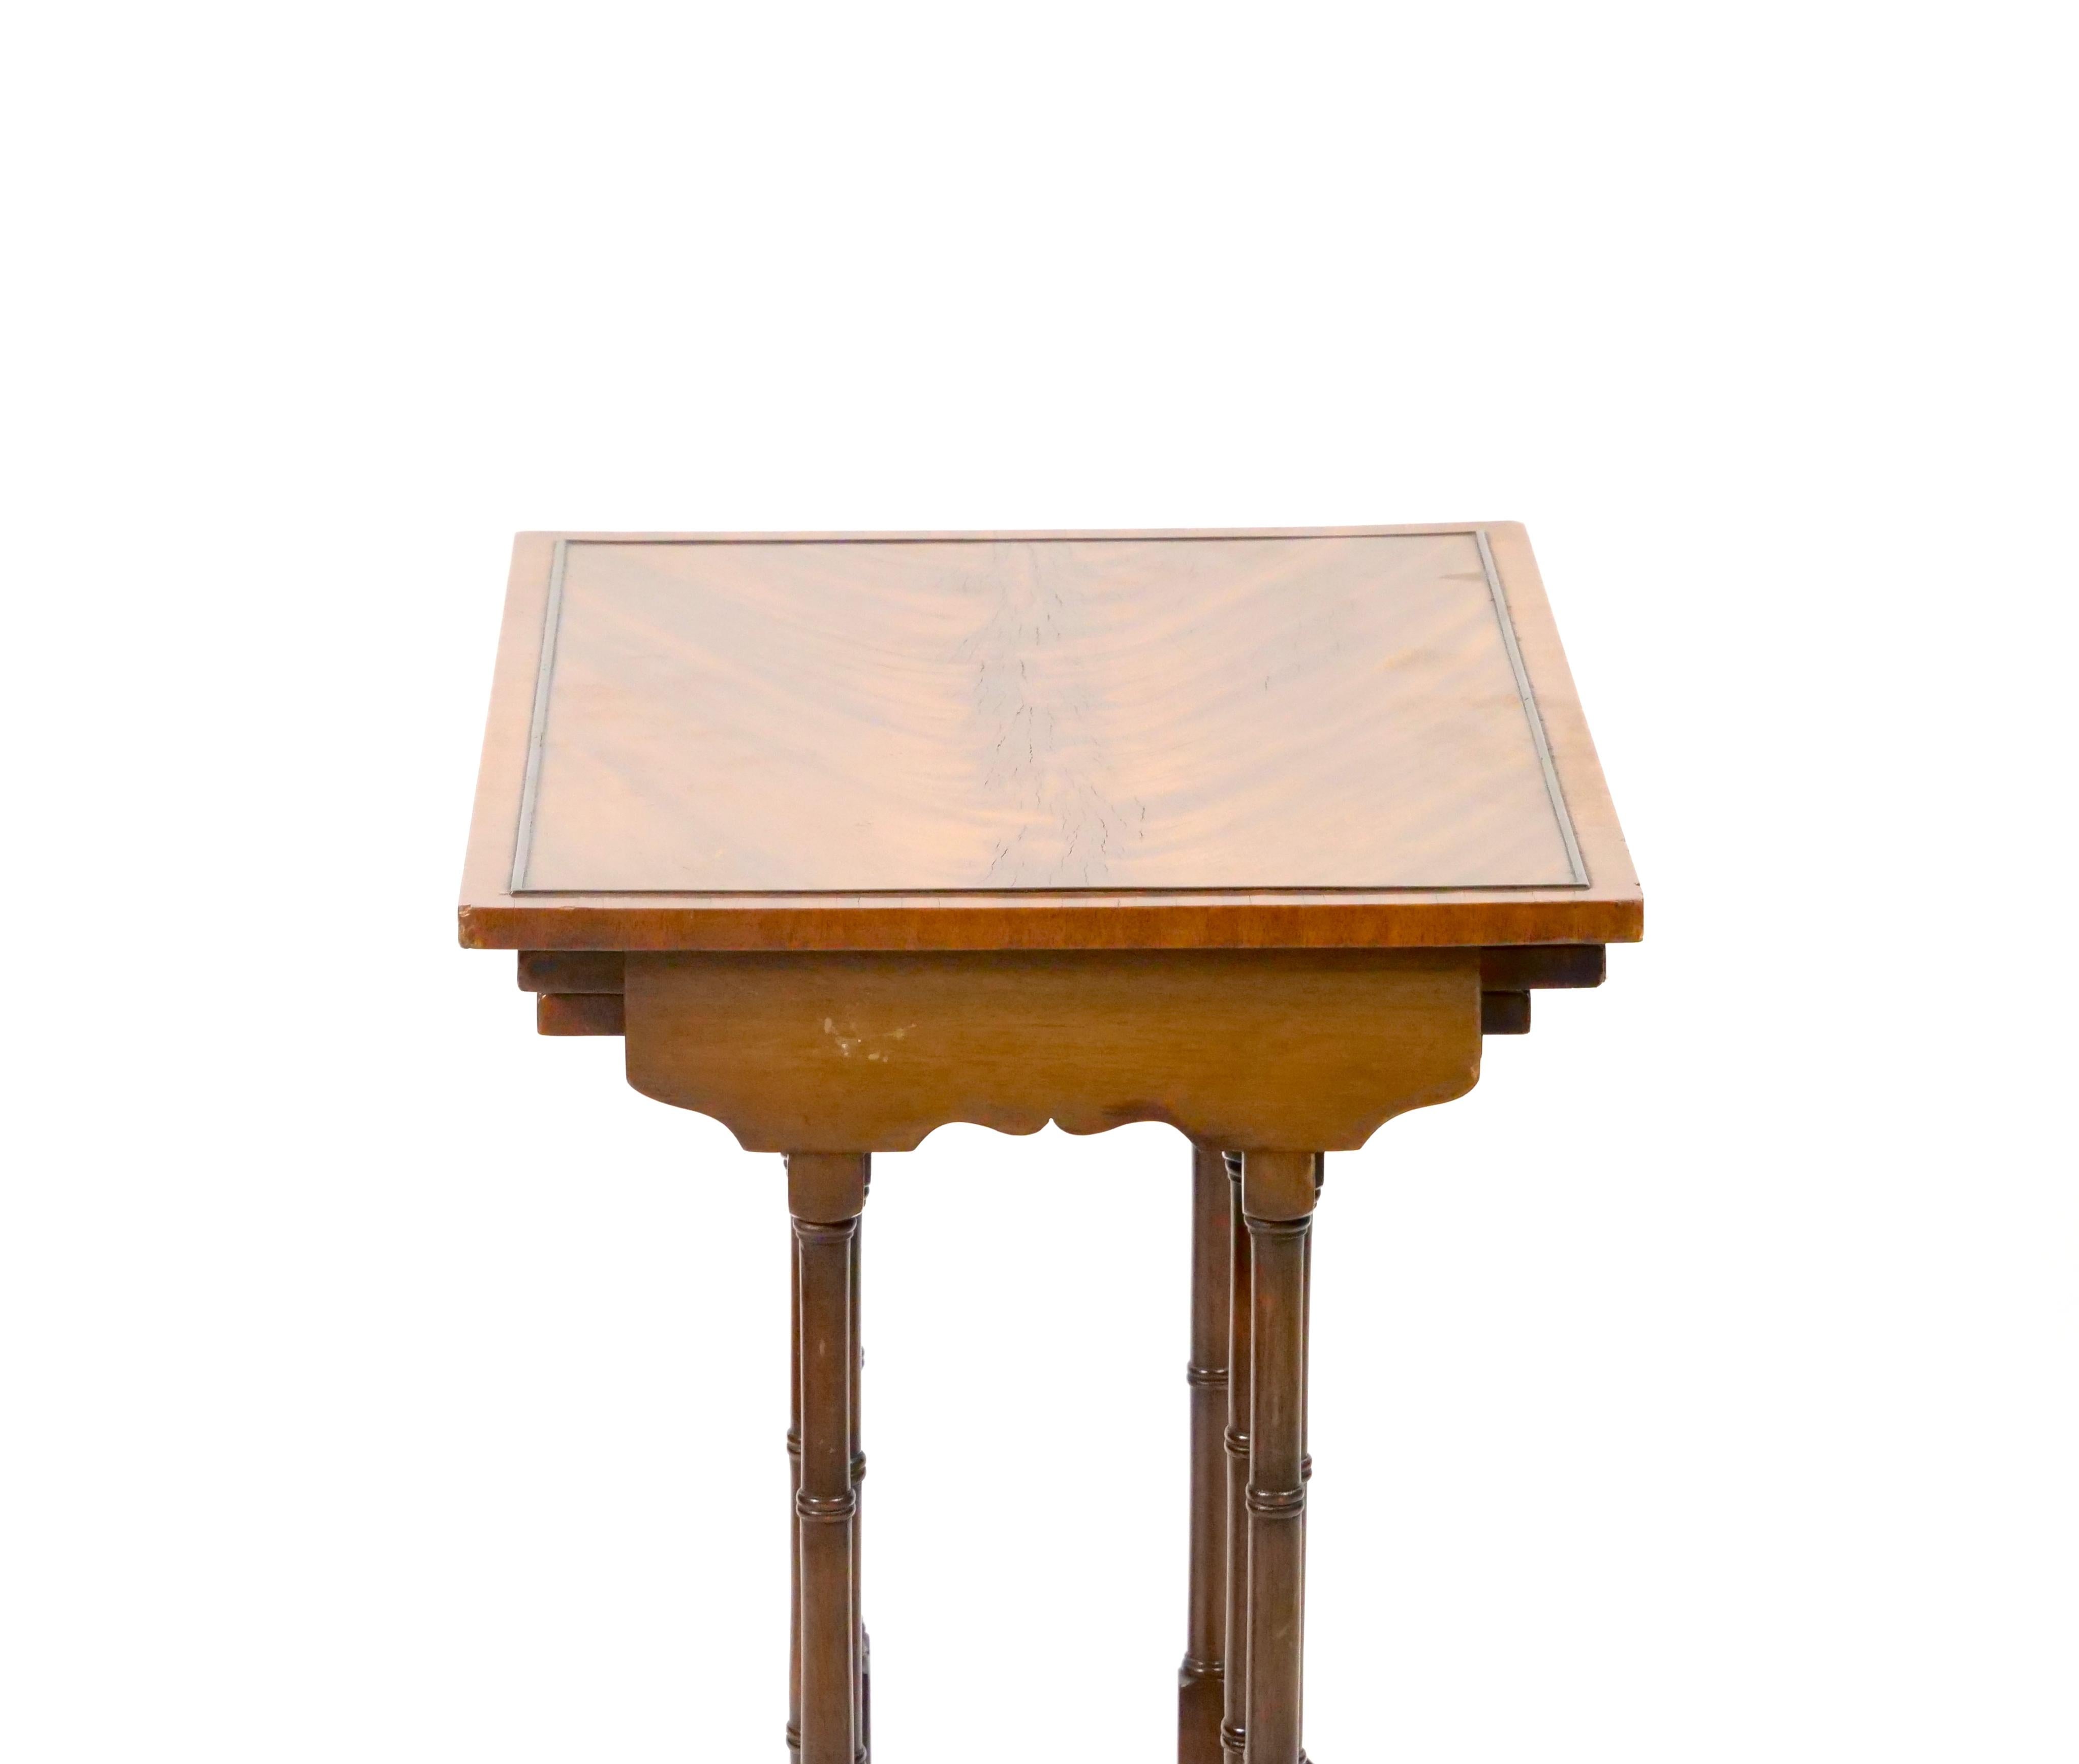 19th Century 19th century Mahogany Inlaid Top Decorated Stacking Tables For Sale